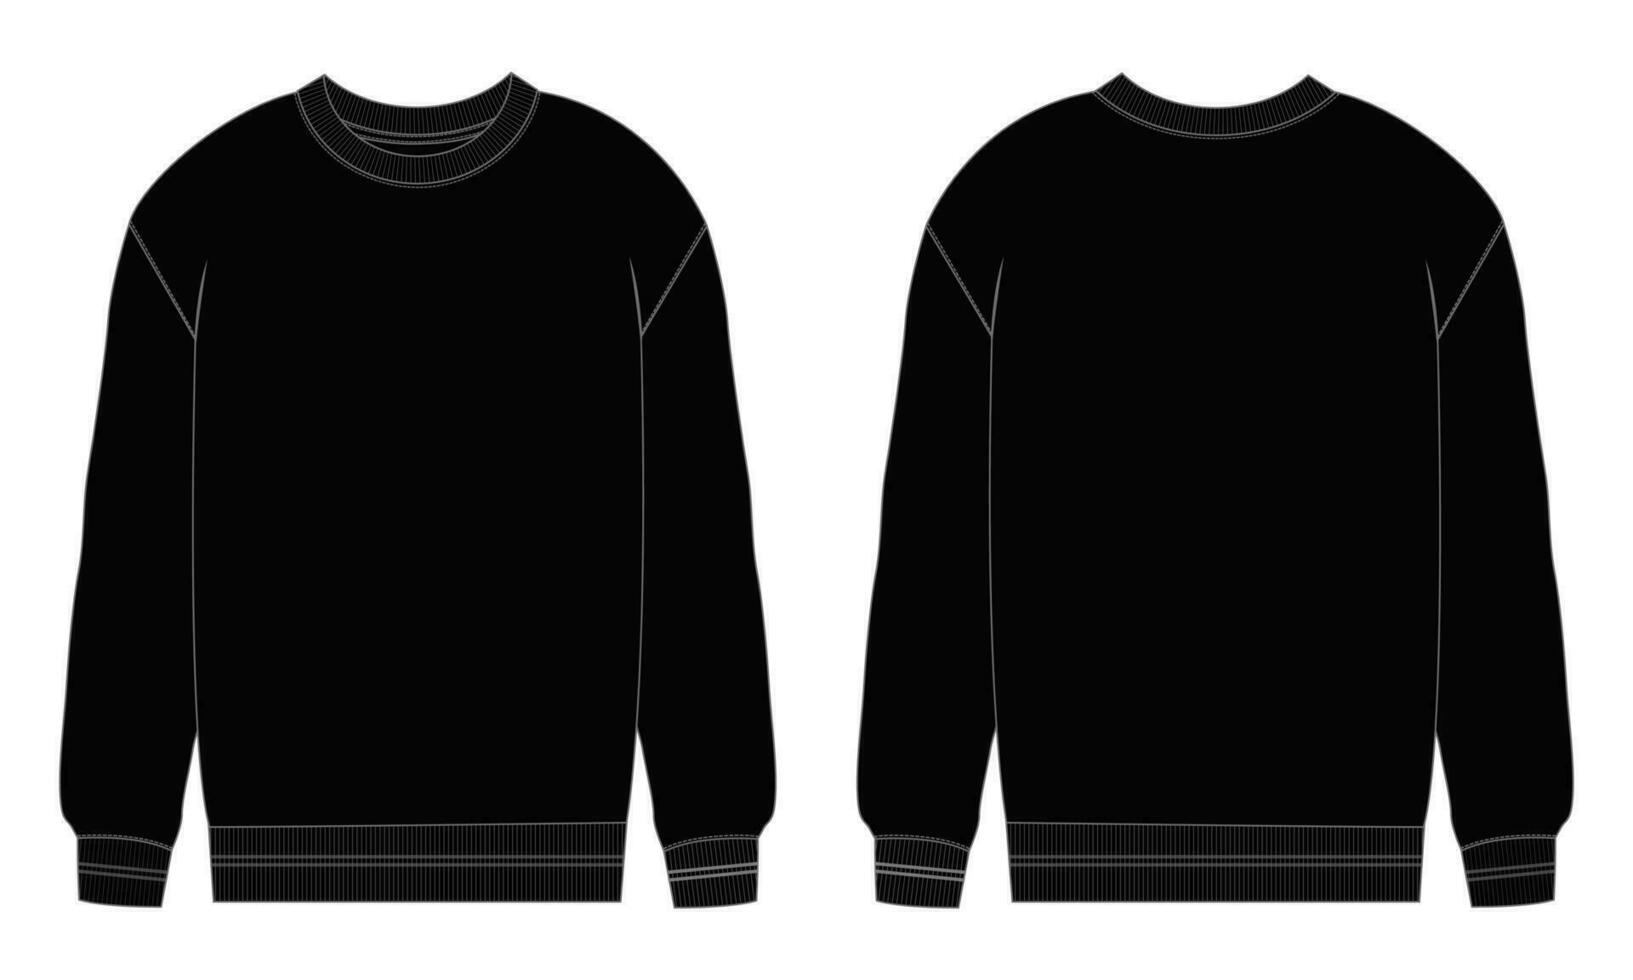 Long sleeve hoodie technical drawing fashion flat sketch vector illustration black color template front and back views